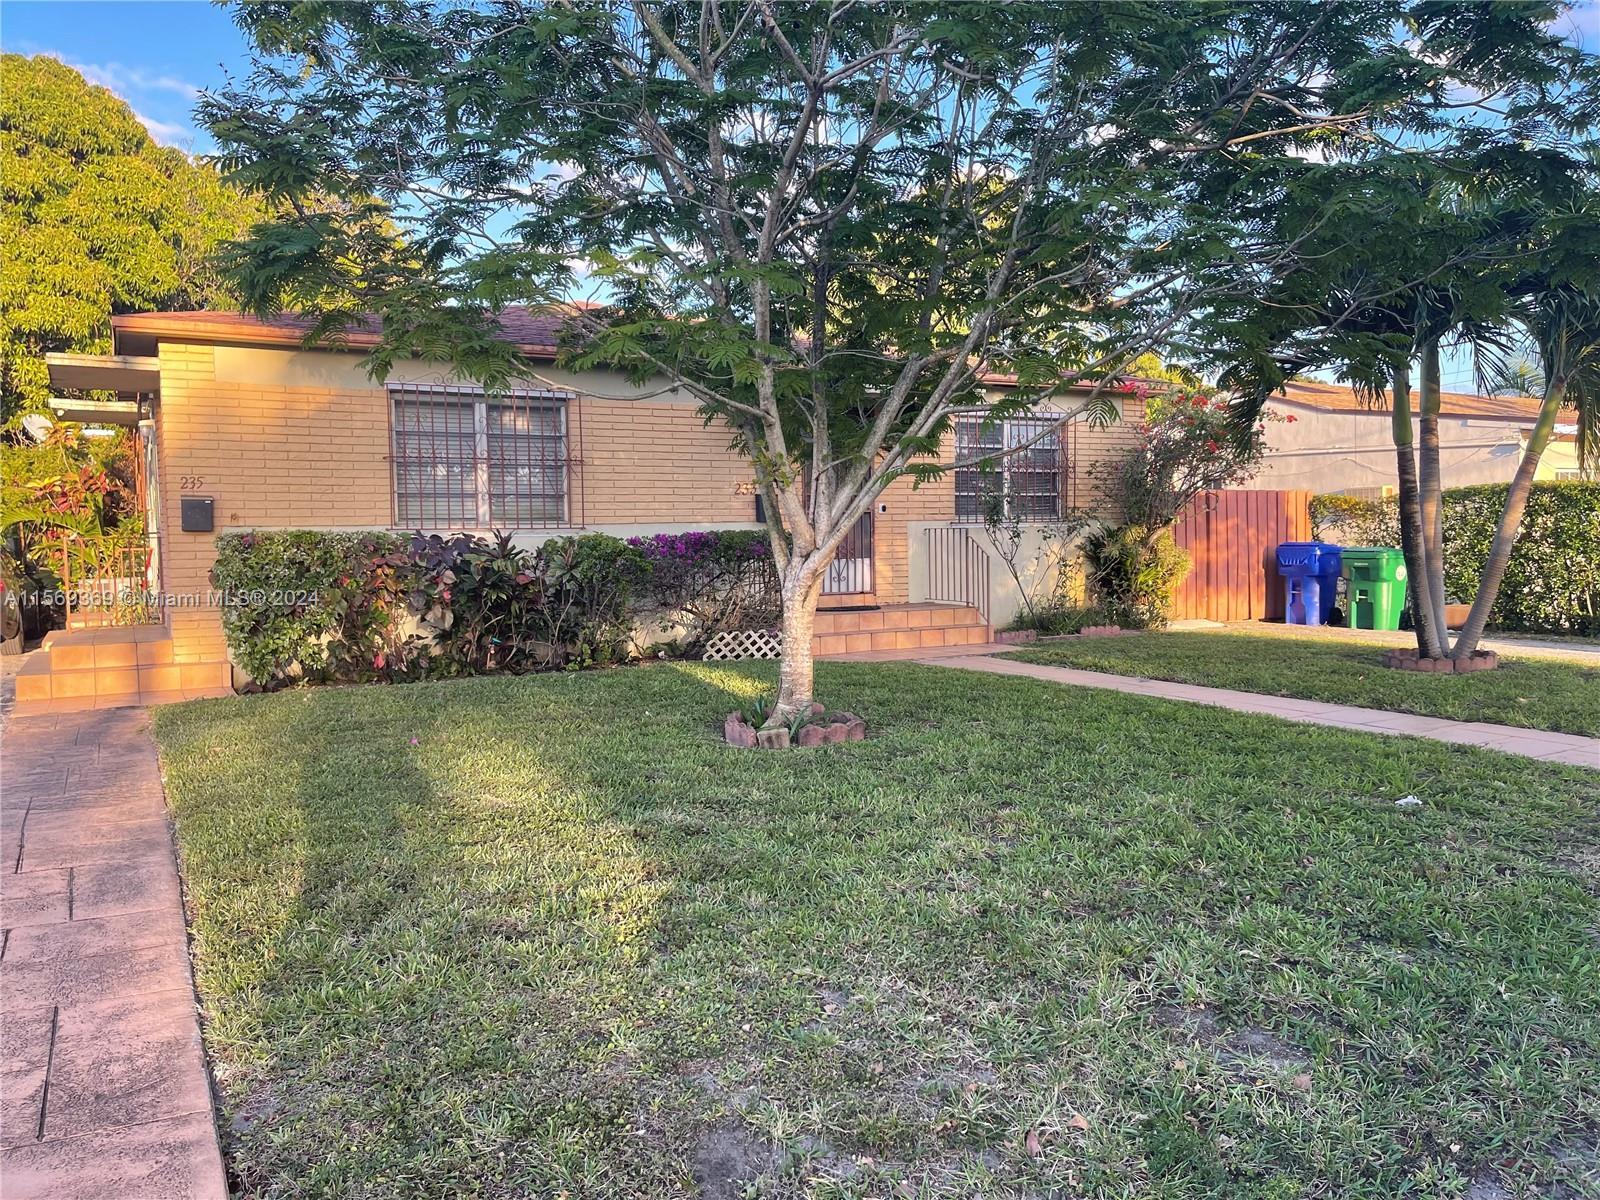 Photo of 235 NW 45th Ave in Miami, FL